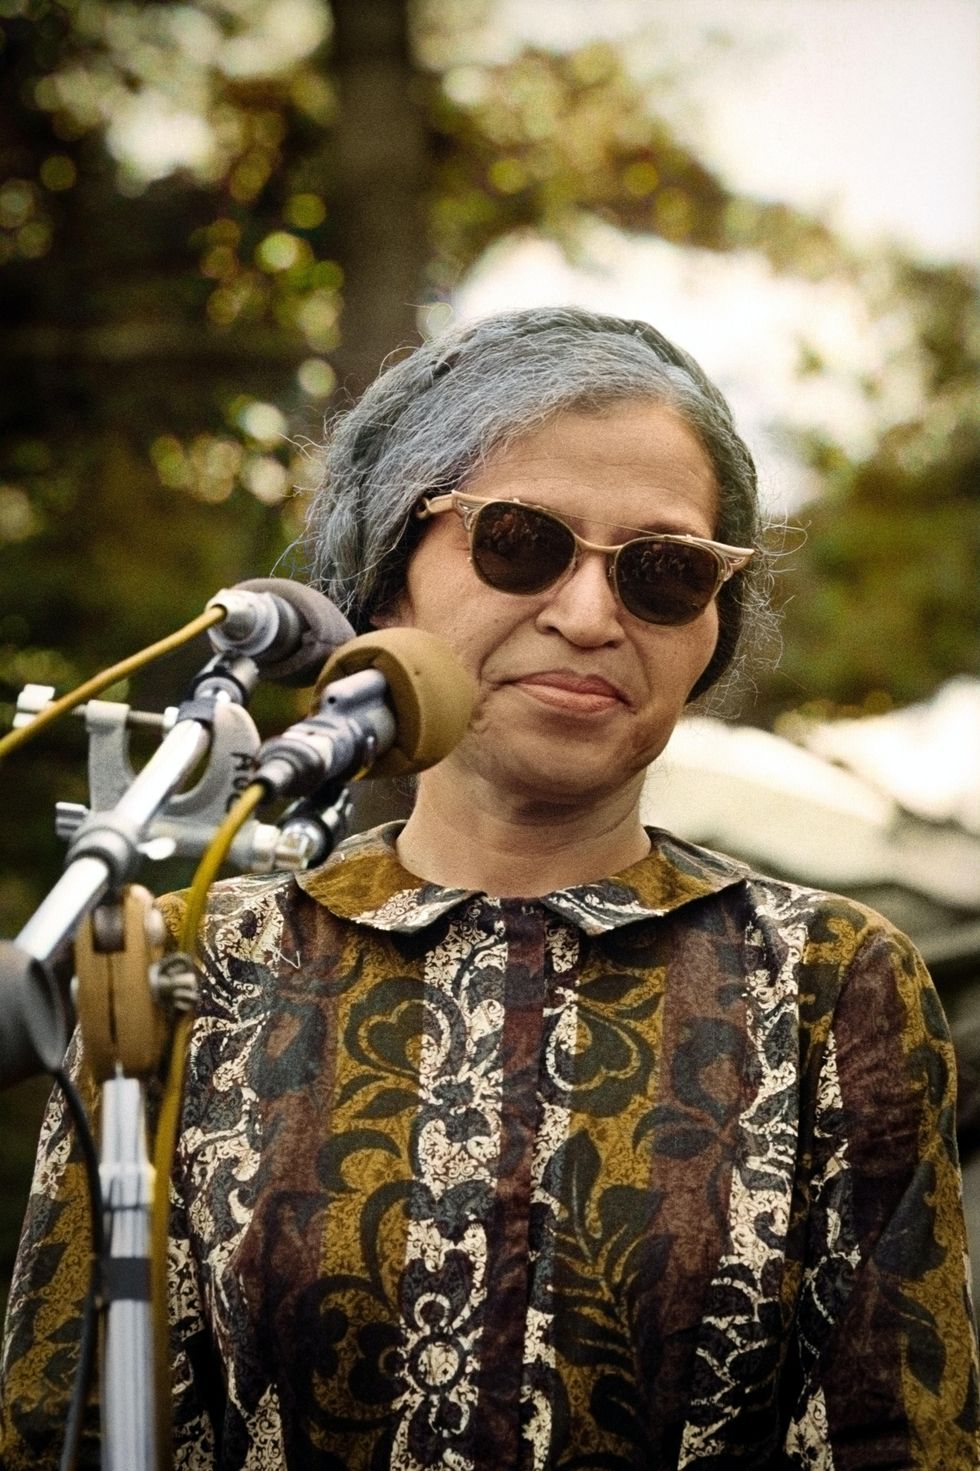 Black woman wearing sunglasses in front of a microphone